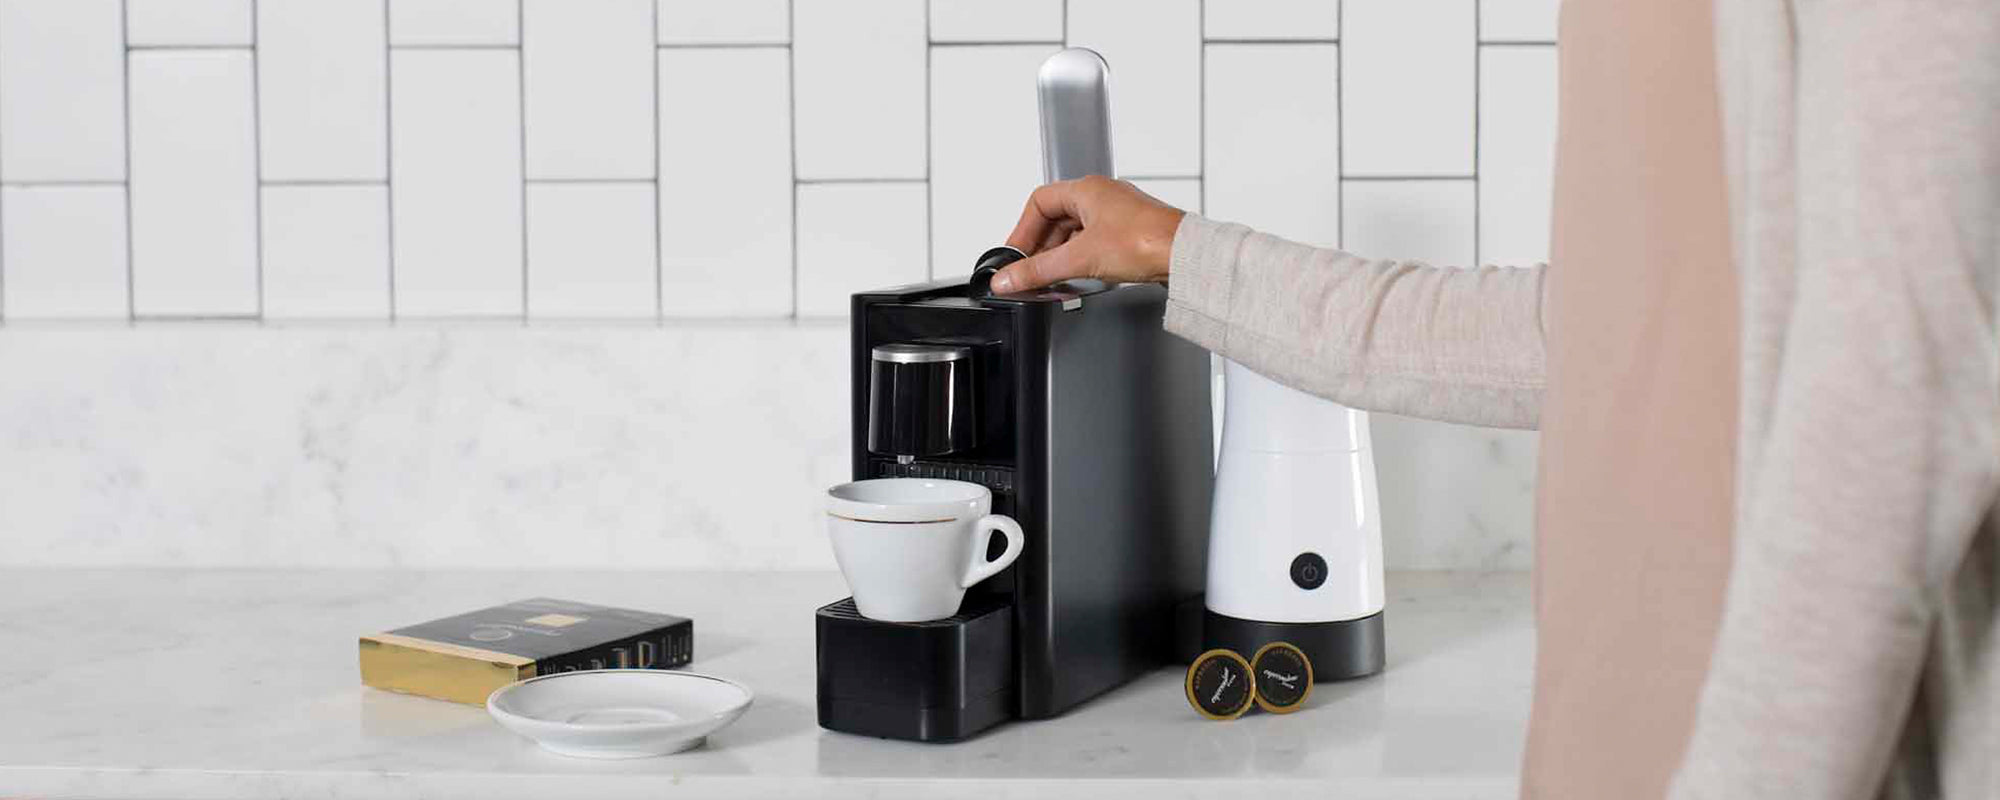 Programmable Coffee Pour Function